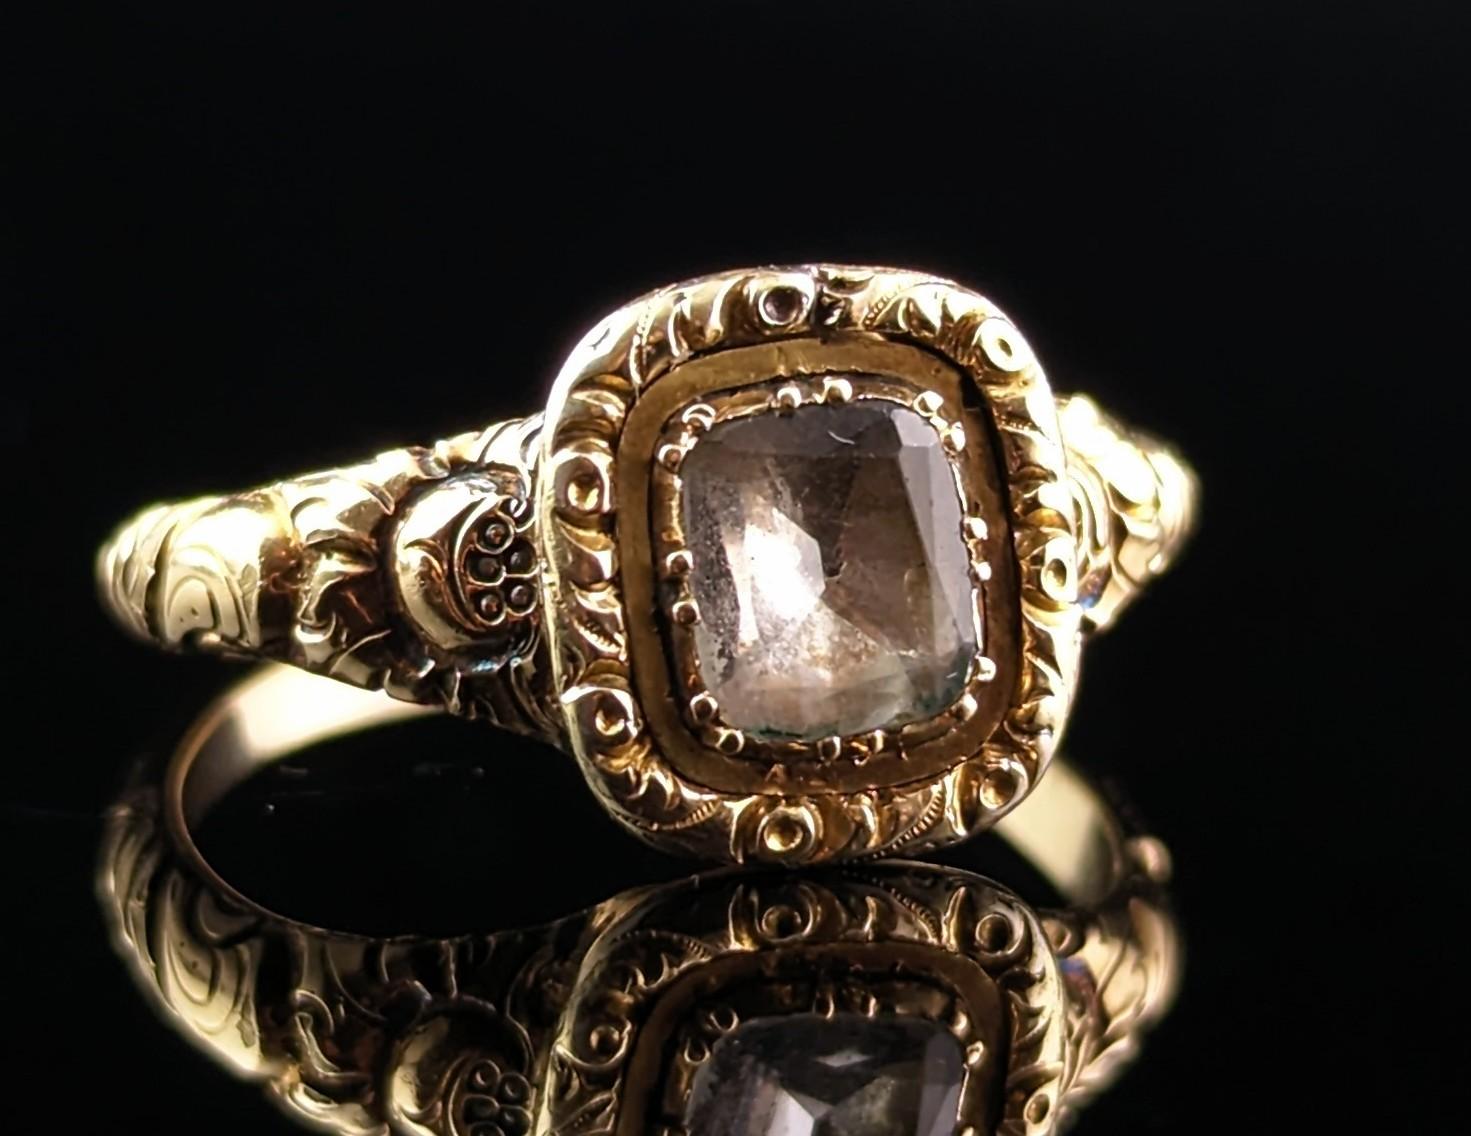 Antique Georgian Foiled Quartz Ring, 12k Gold, Chase and Engraved 6